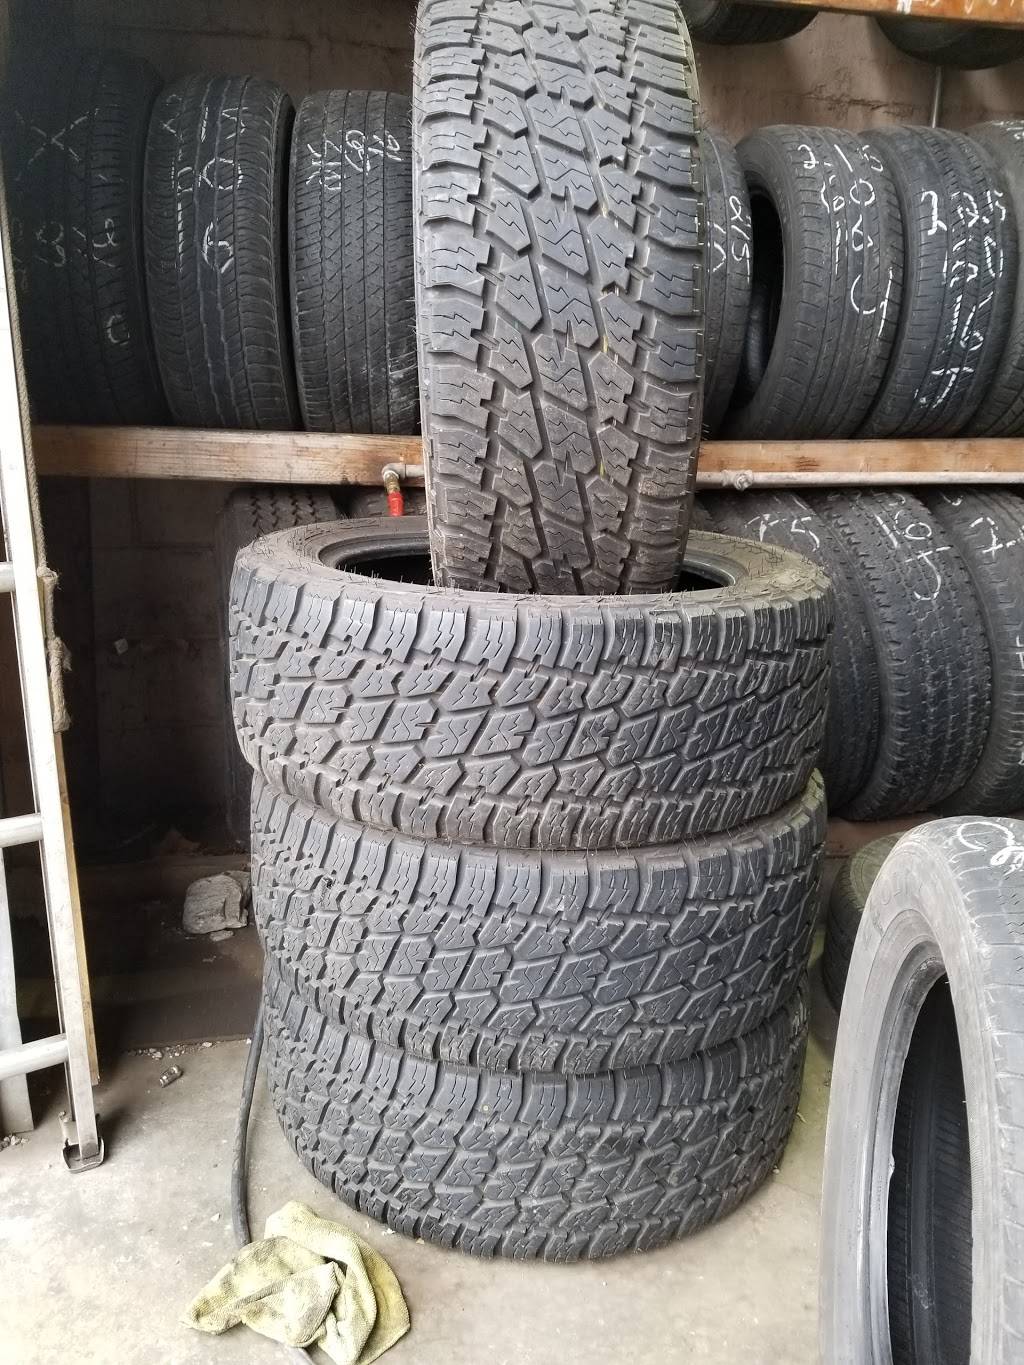 Quick Stop Tire Shop | 357 N 25th St, East St Louis, IL 62205, USA | Phone: (618) 875-9725